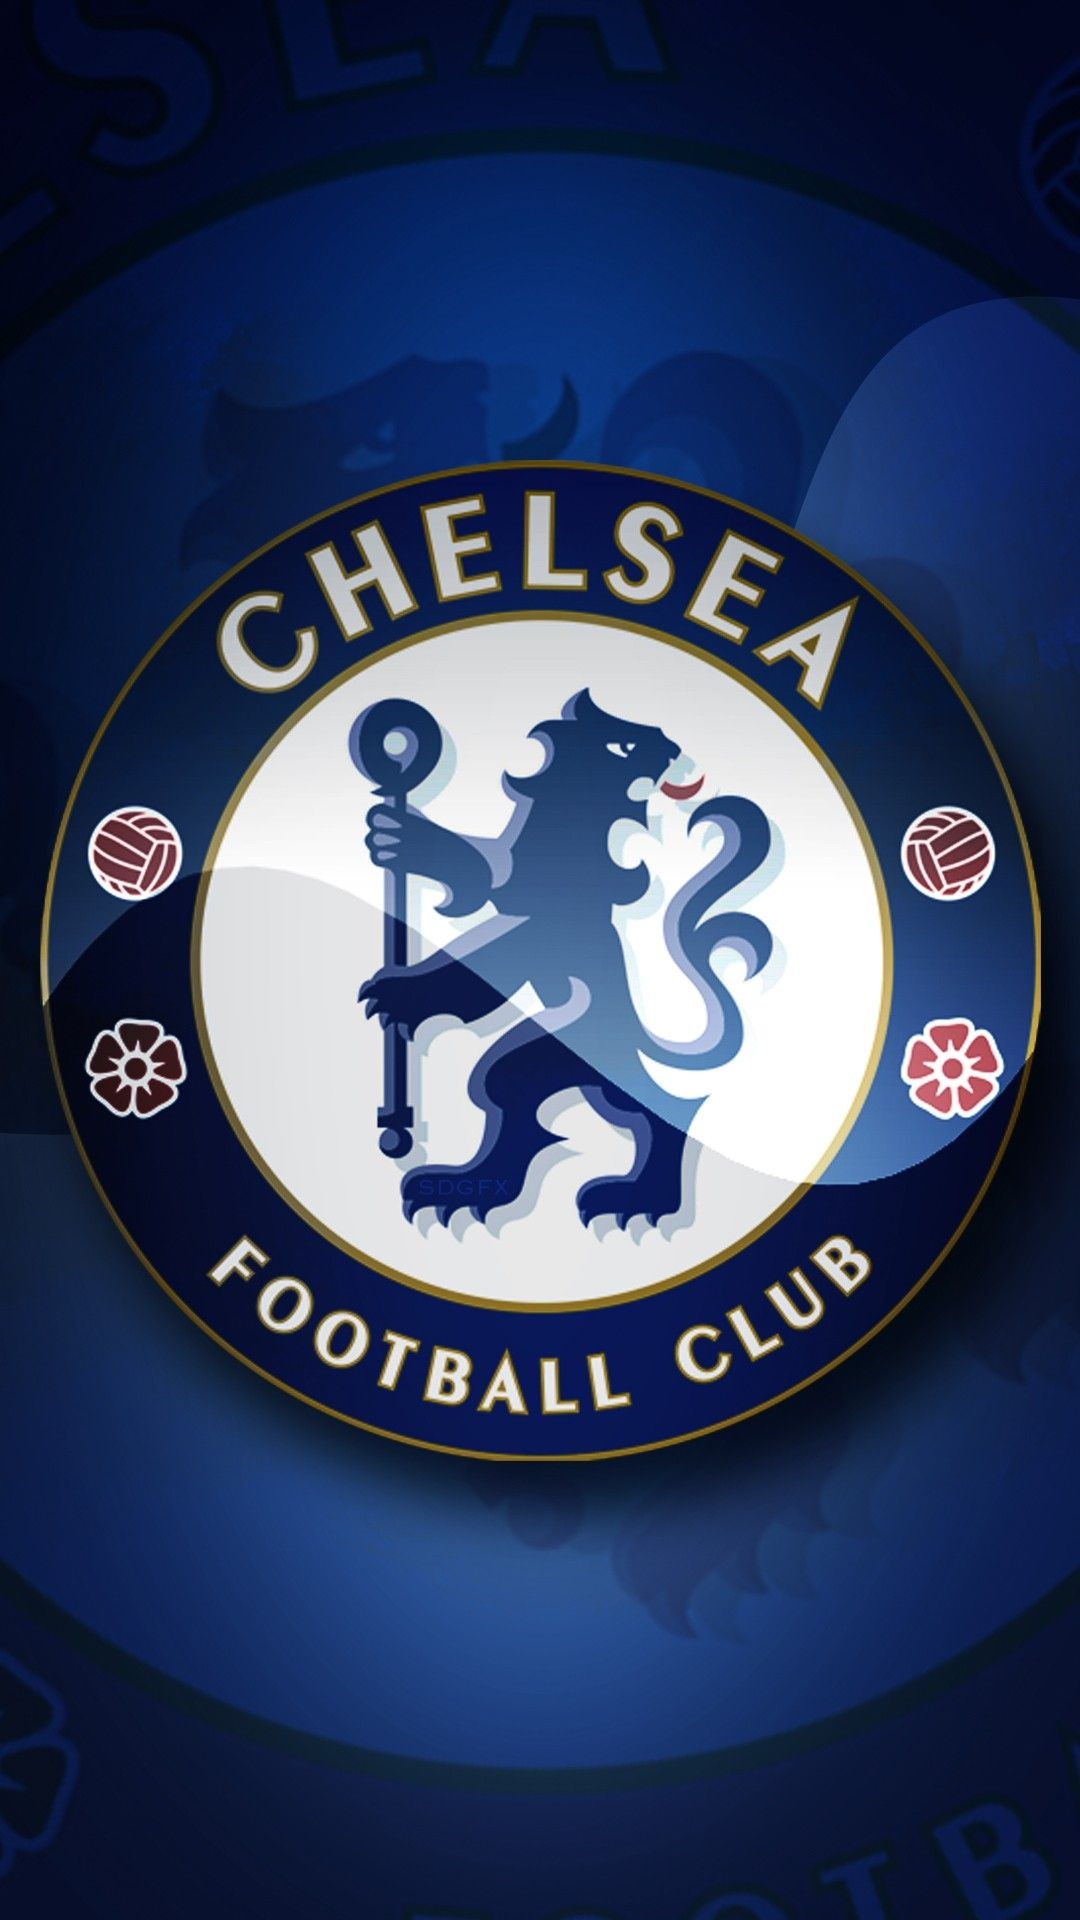 Chelsea: The club won the FA Cup for the first time in 1970, their first European honor. 1080x1920 Full HD Background.